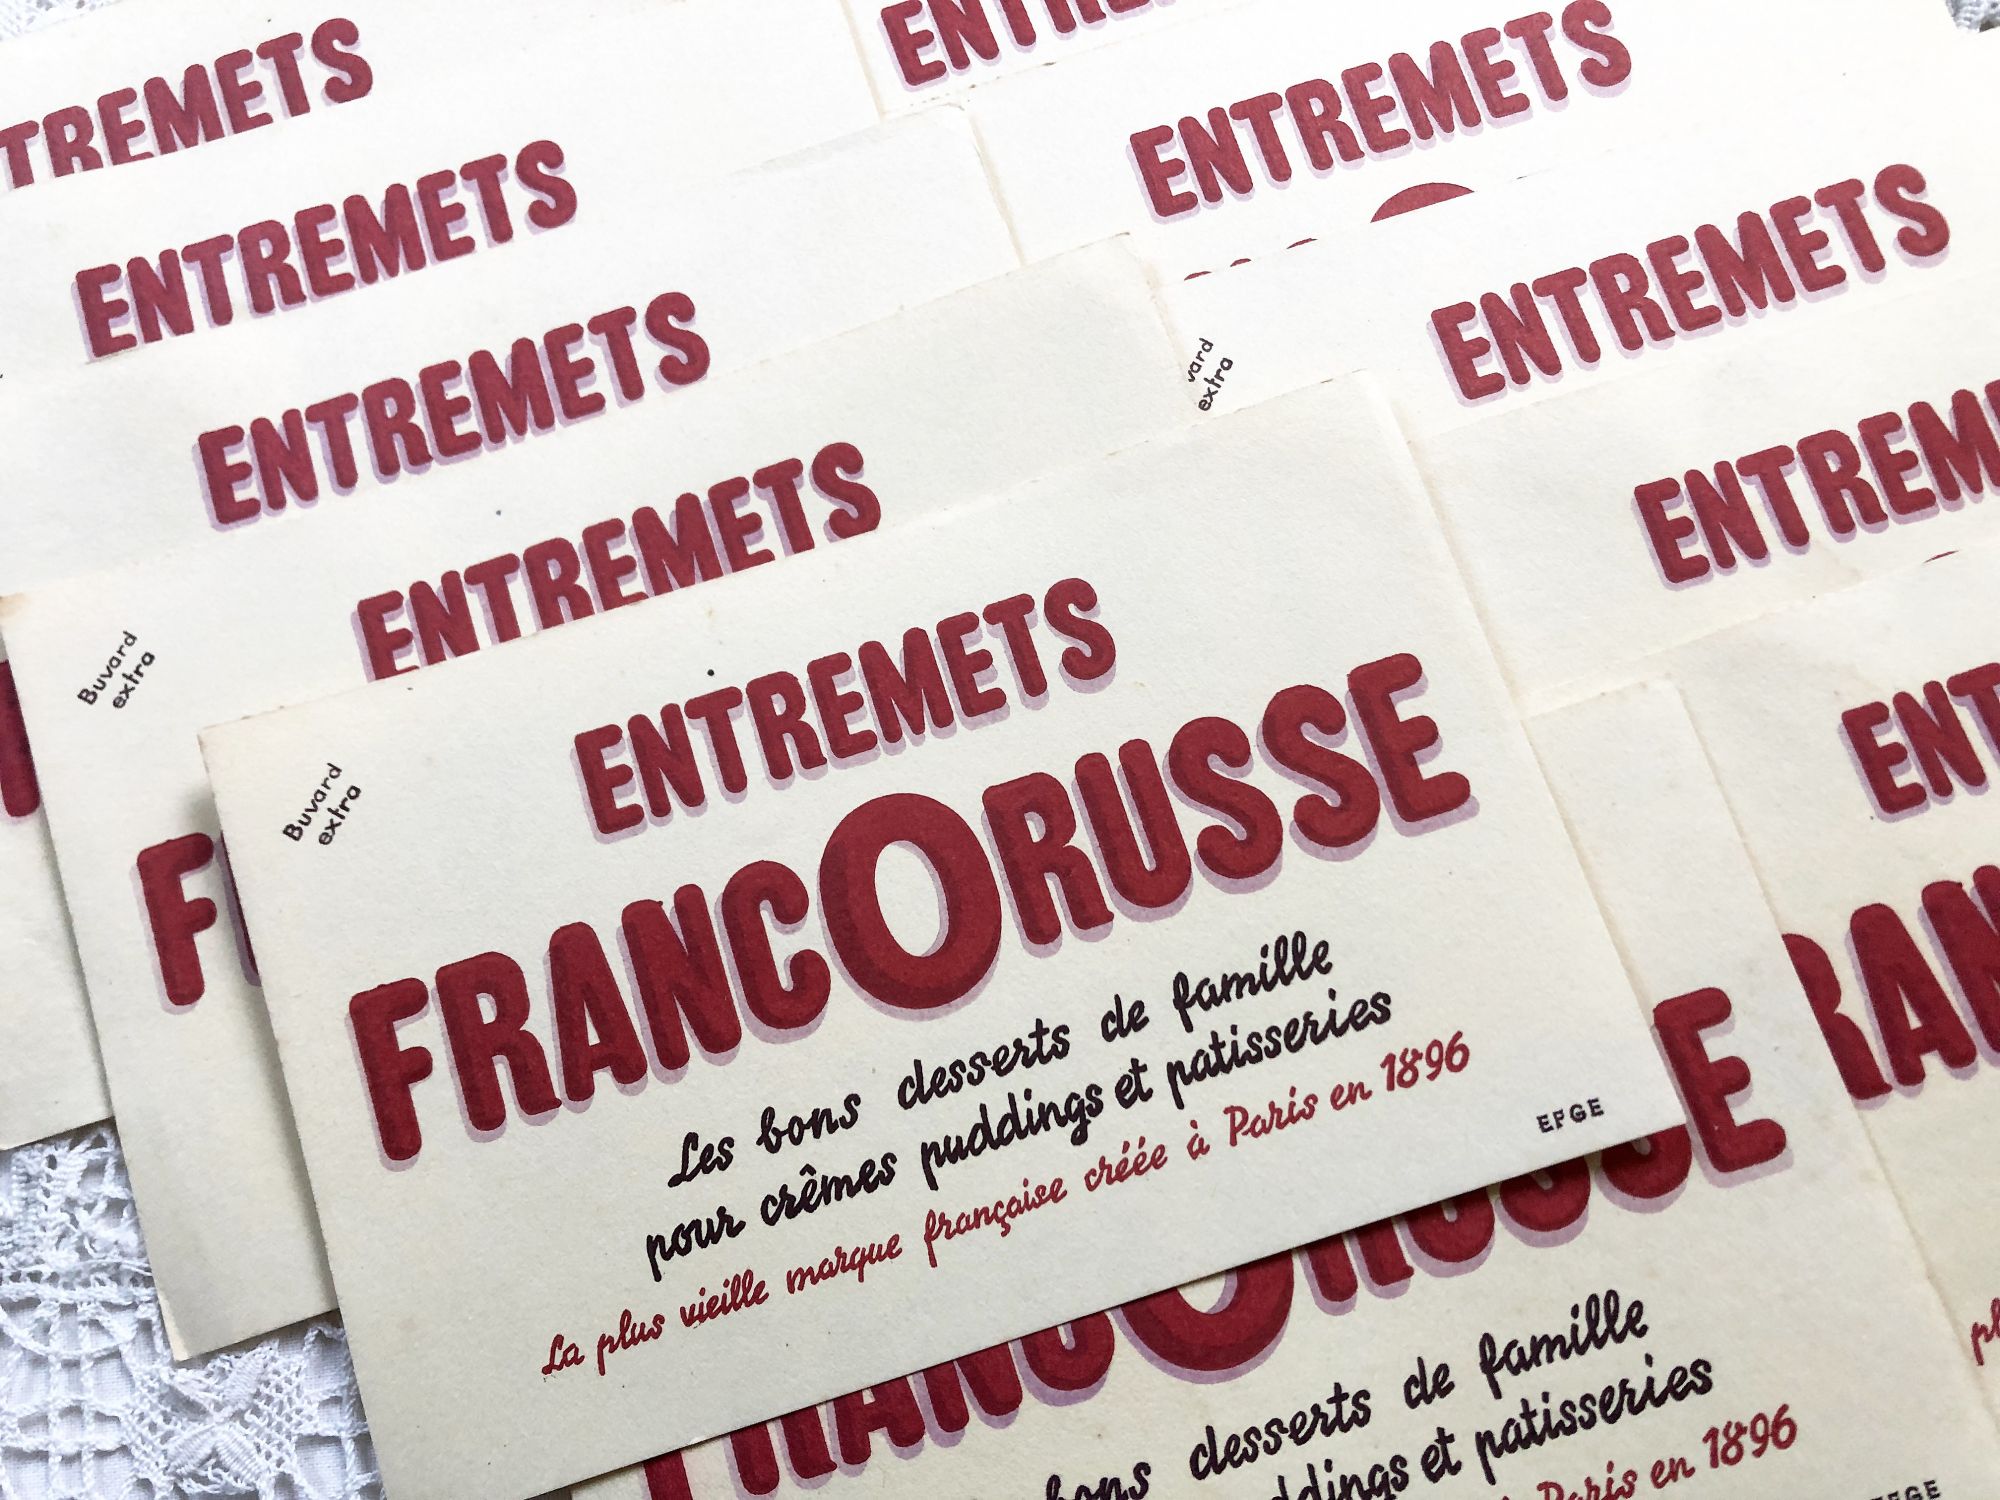 Advertising blotter of the French Francorusse entremets brand from 1950s